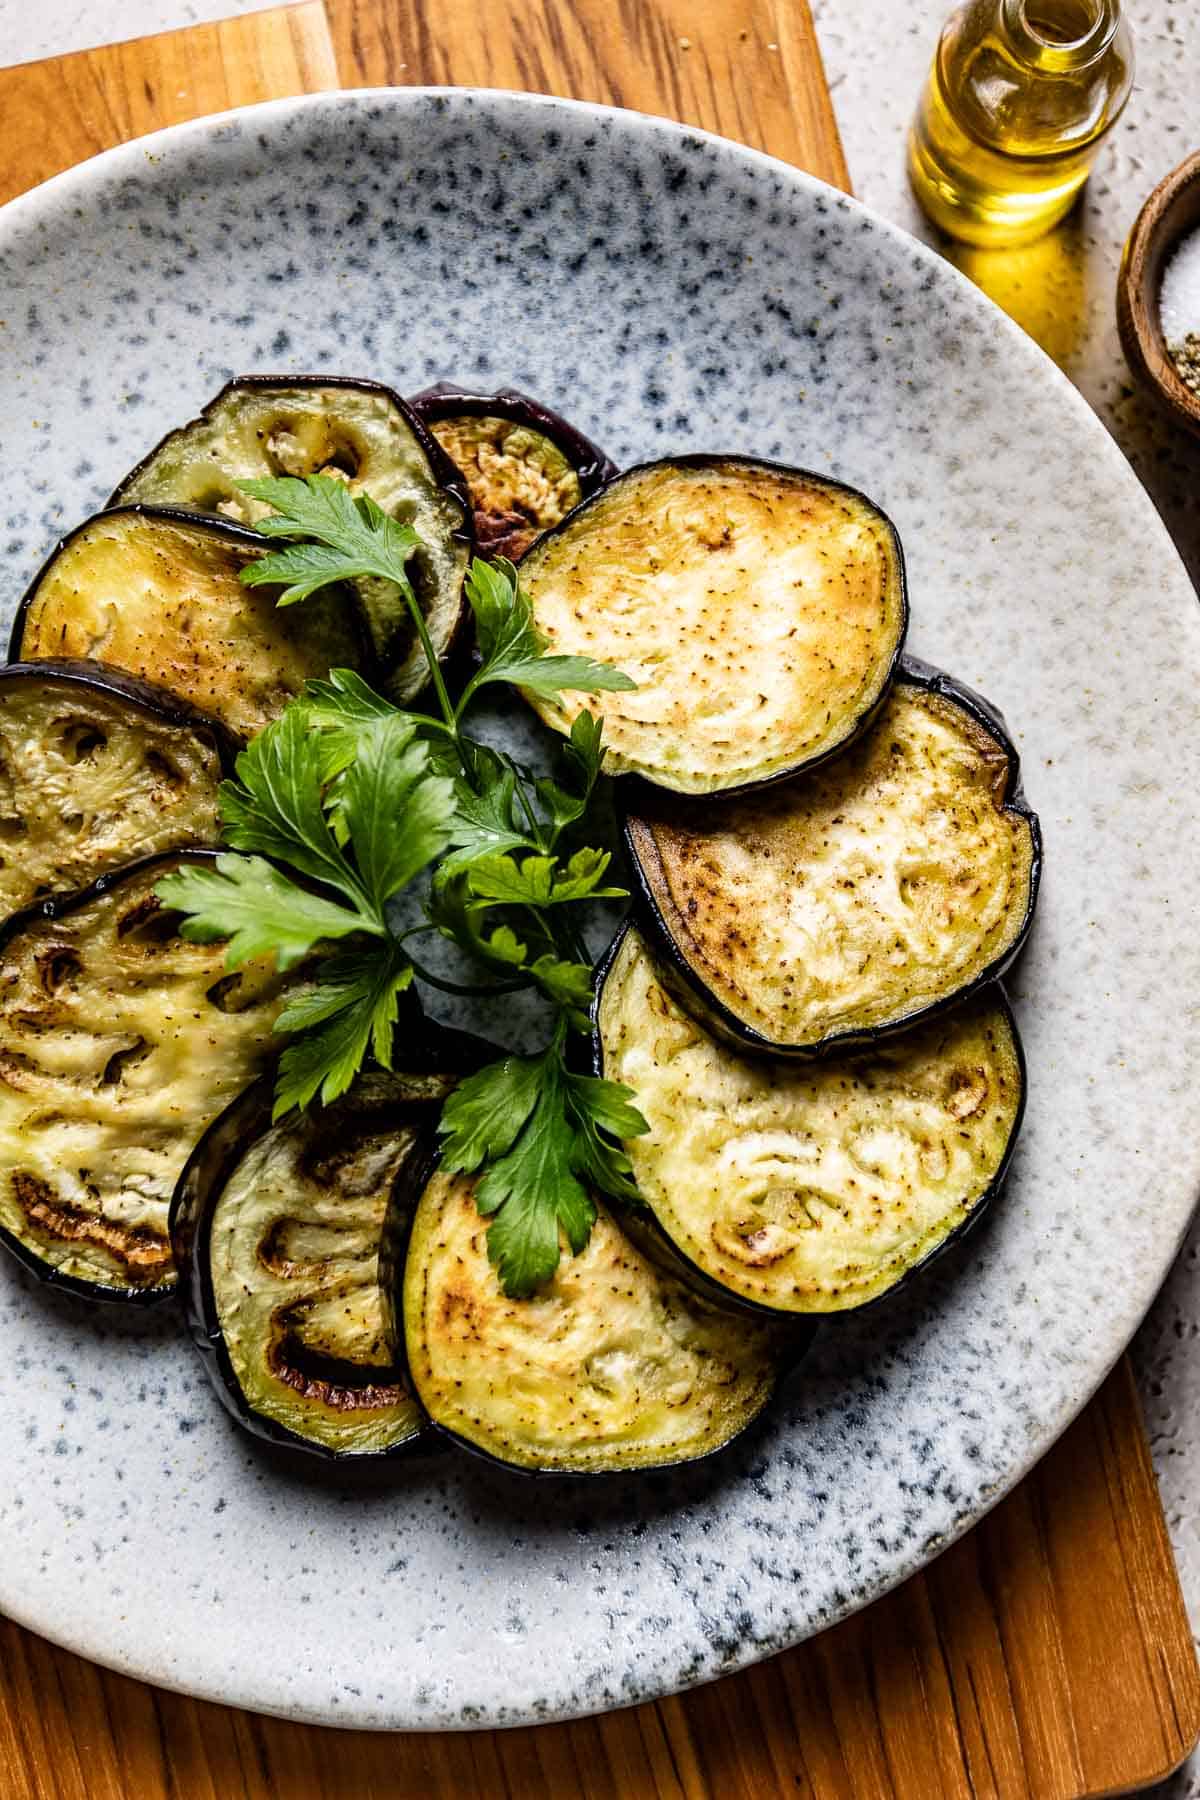 Sauteed eggplant slices on a plate garnished with fresh parsley.